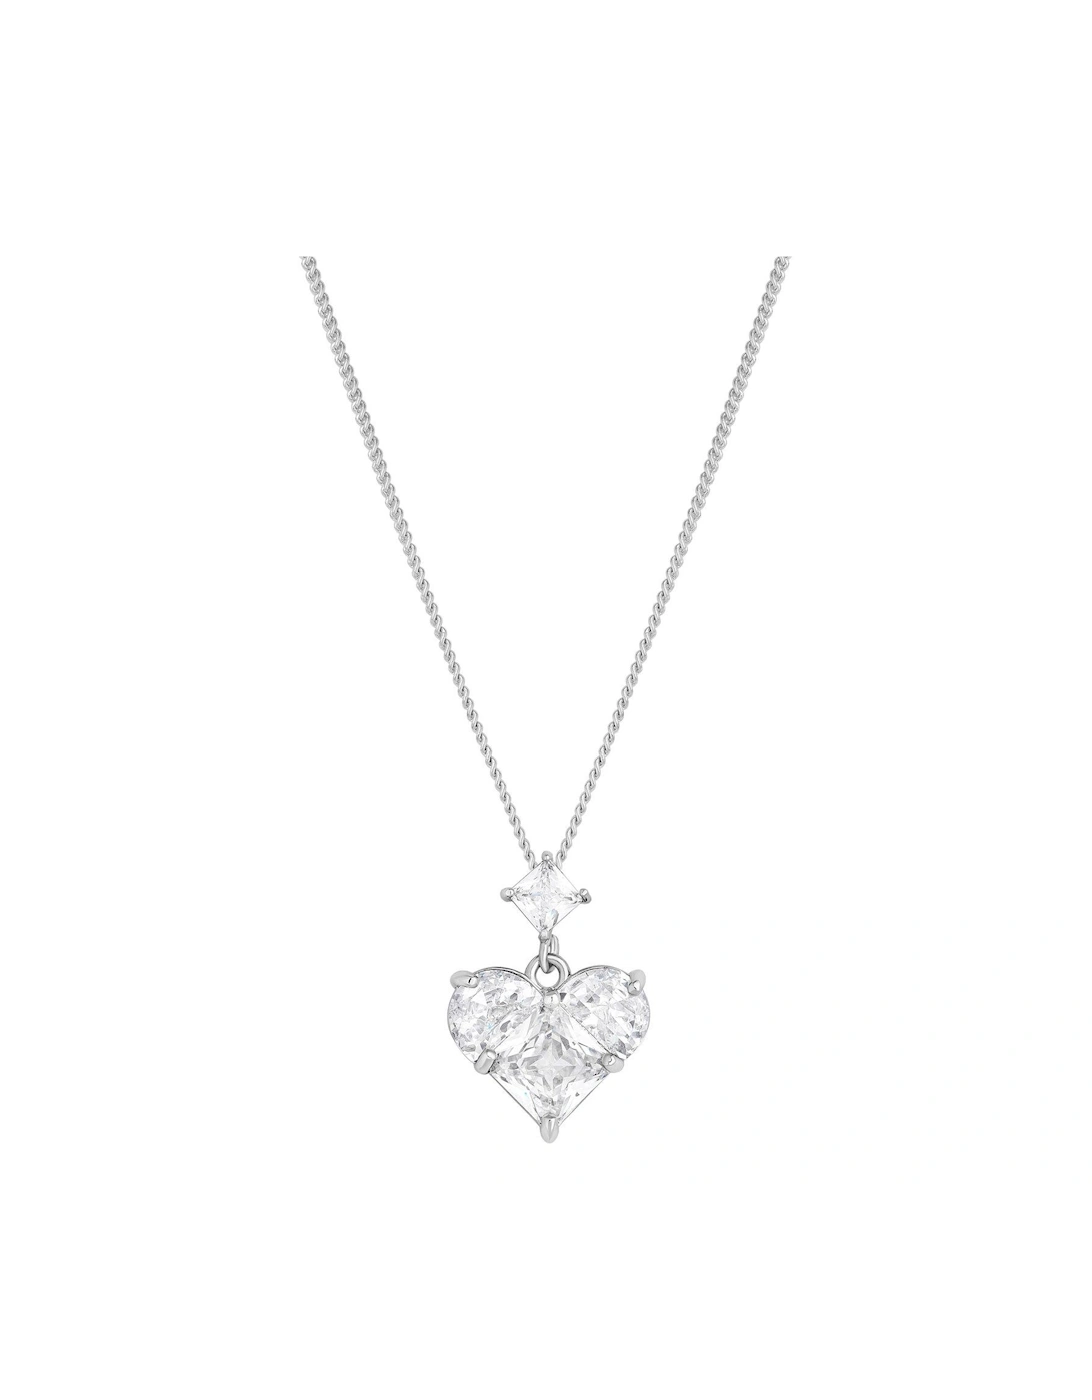 Rhodium Plated Cubic Zirconia Mixed Stone Heart Pendant Necklace - Gift Boxed